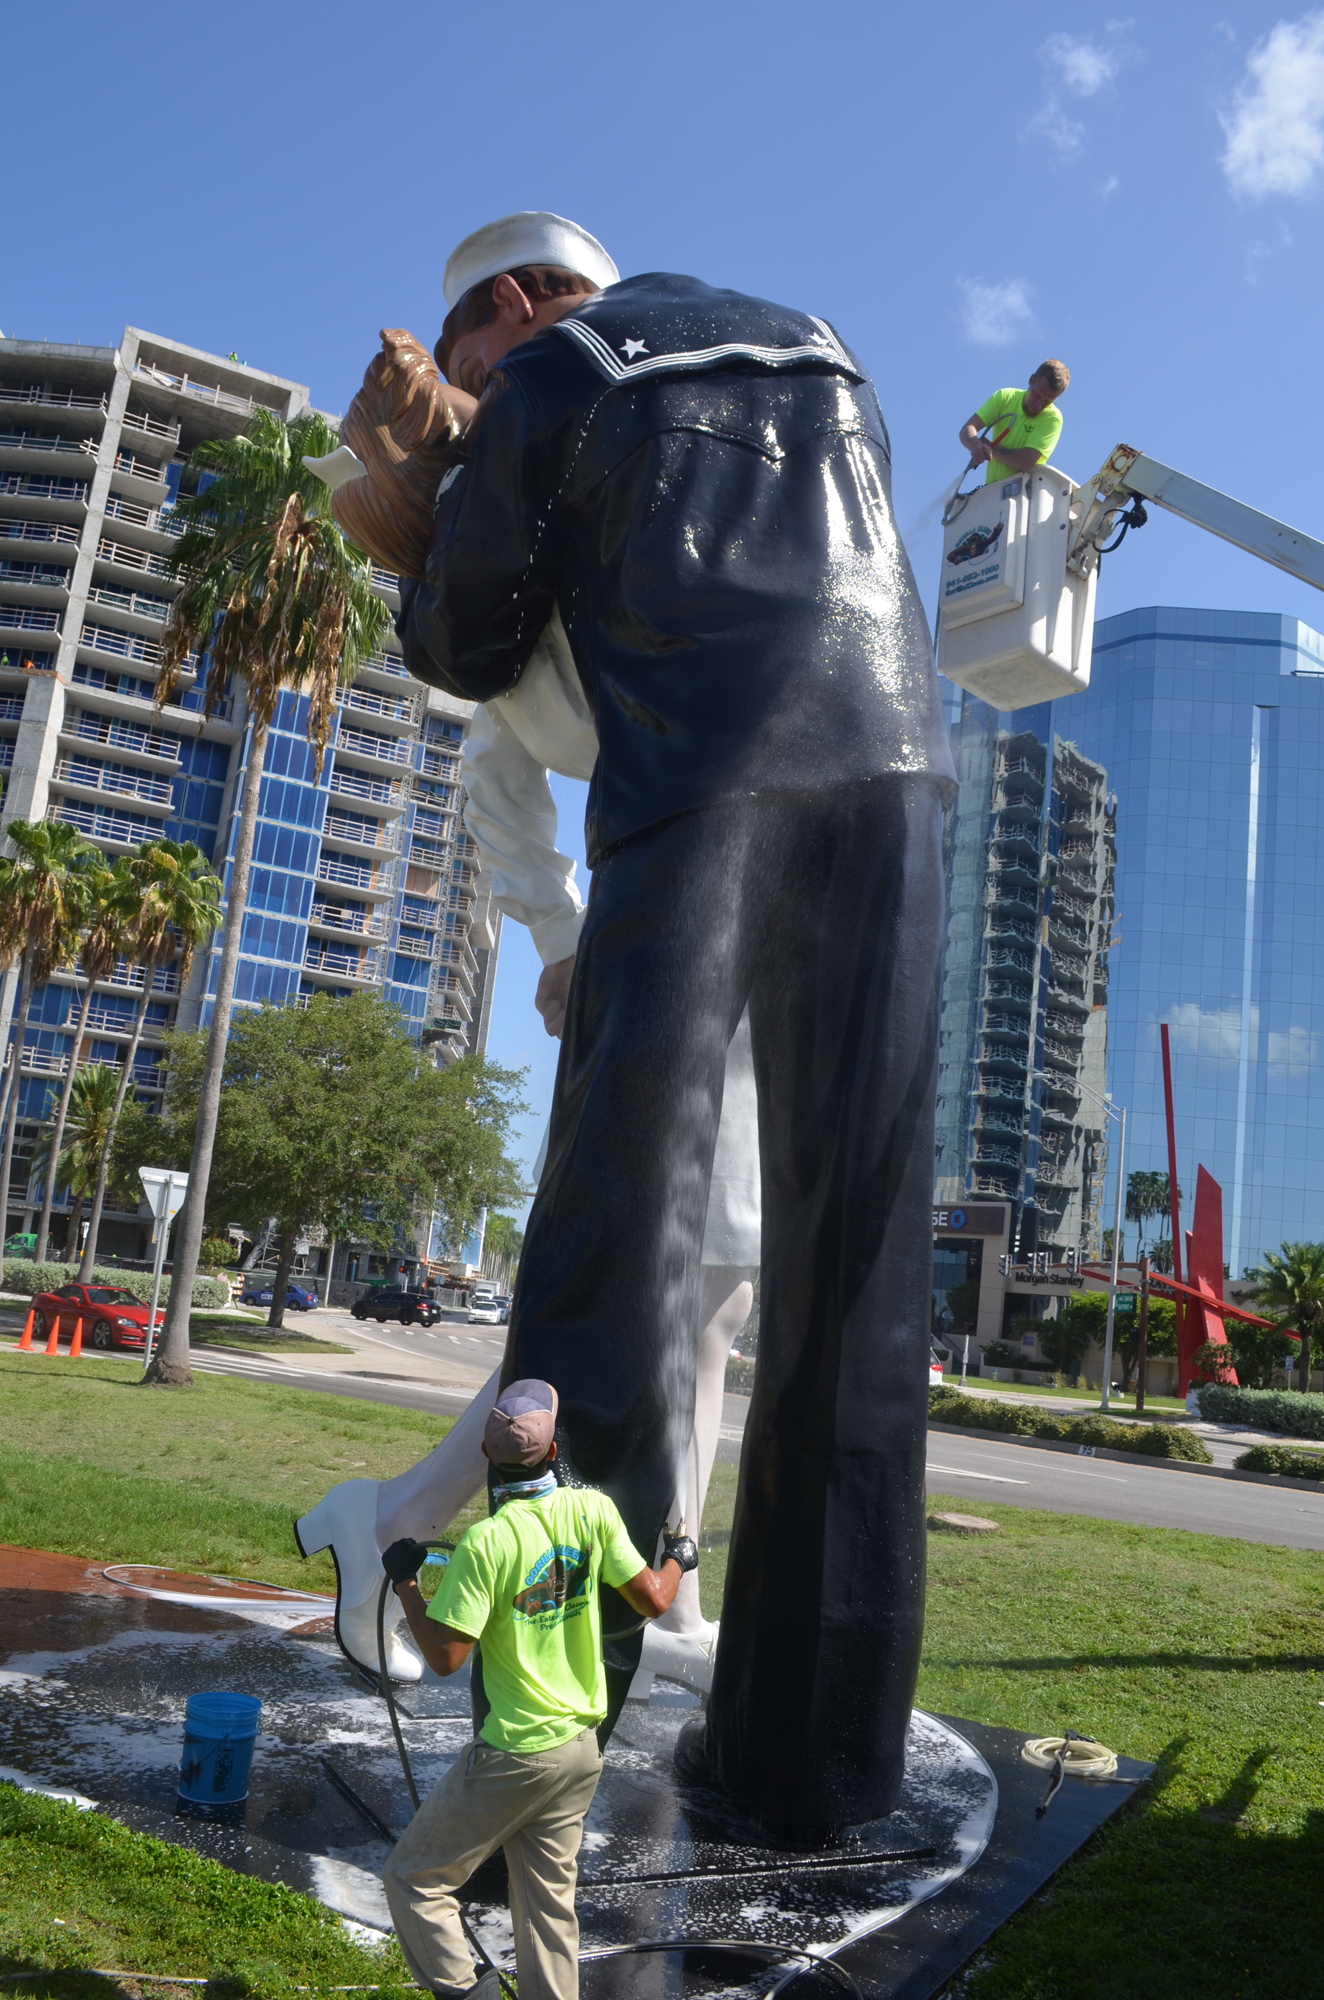 Workers spray the bayfront artwork as part of a pressure-cleaning effort Tuesday morning.